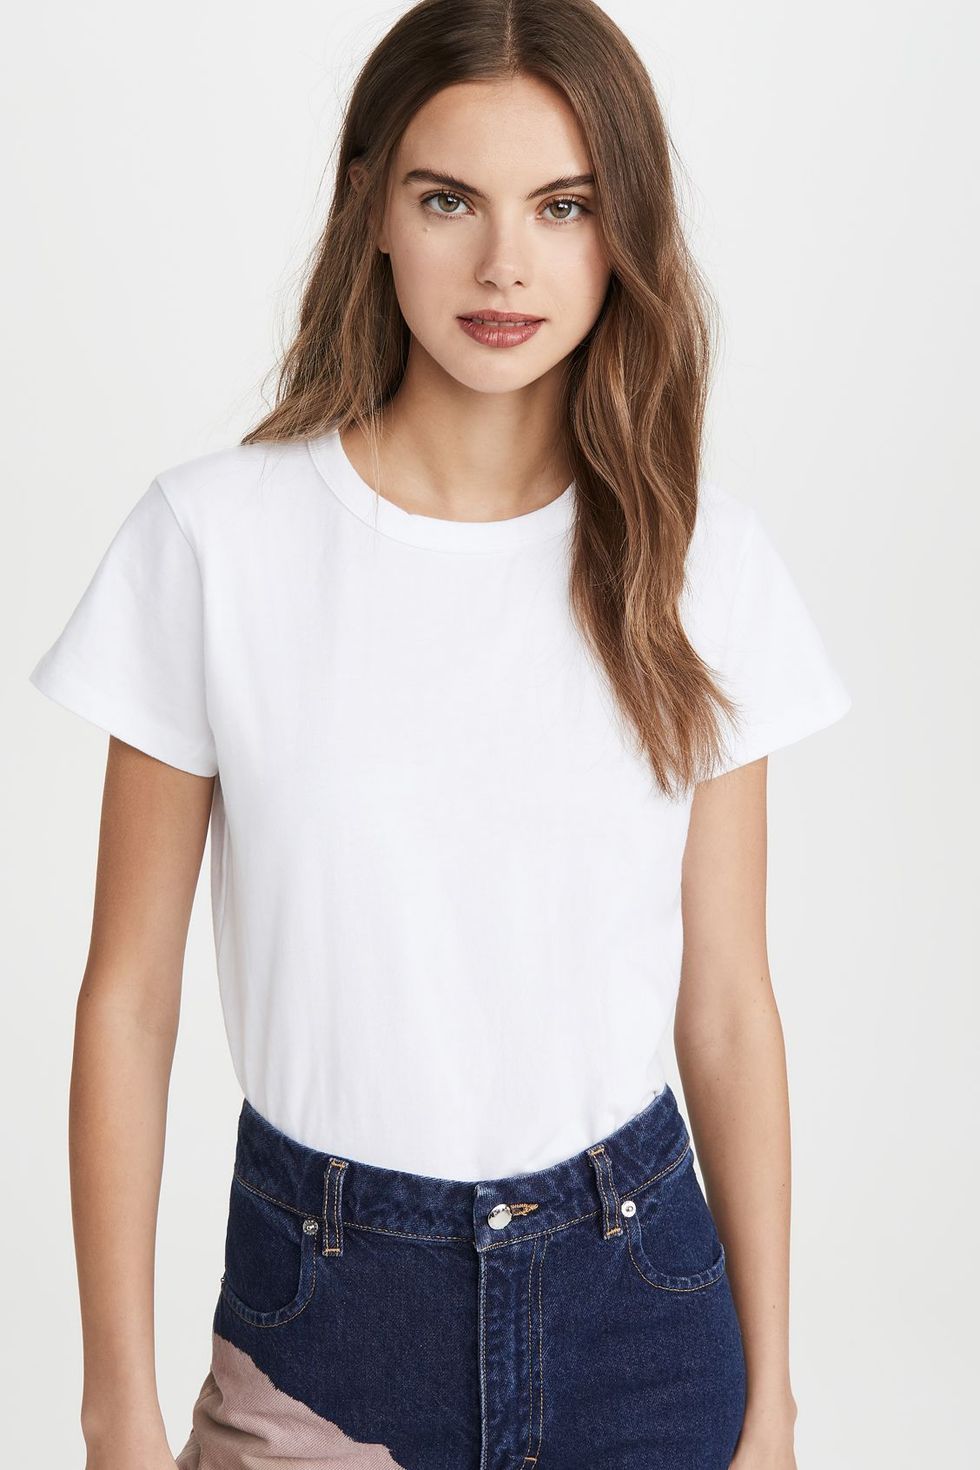 27 Best T-Shirts for Women in 2023